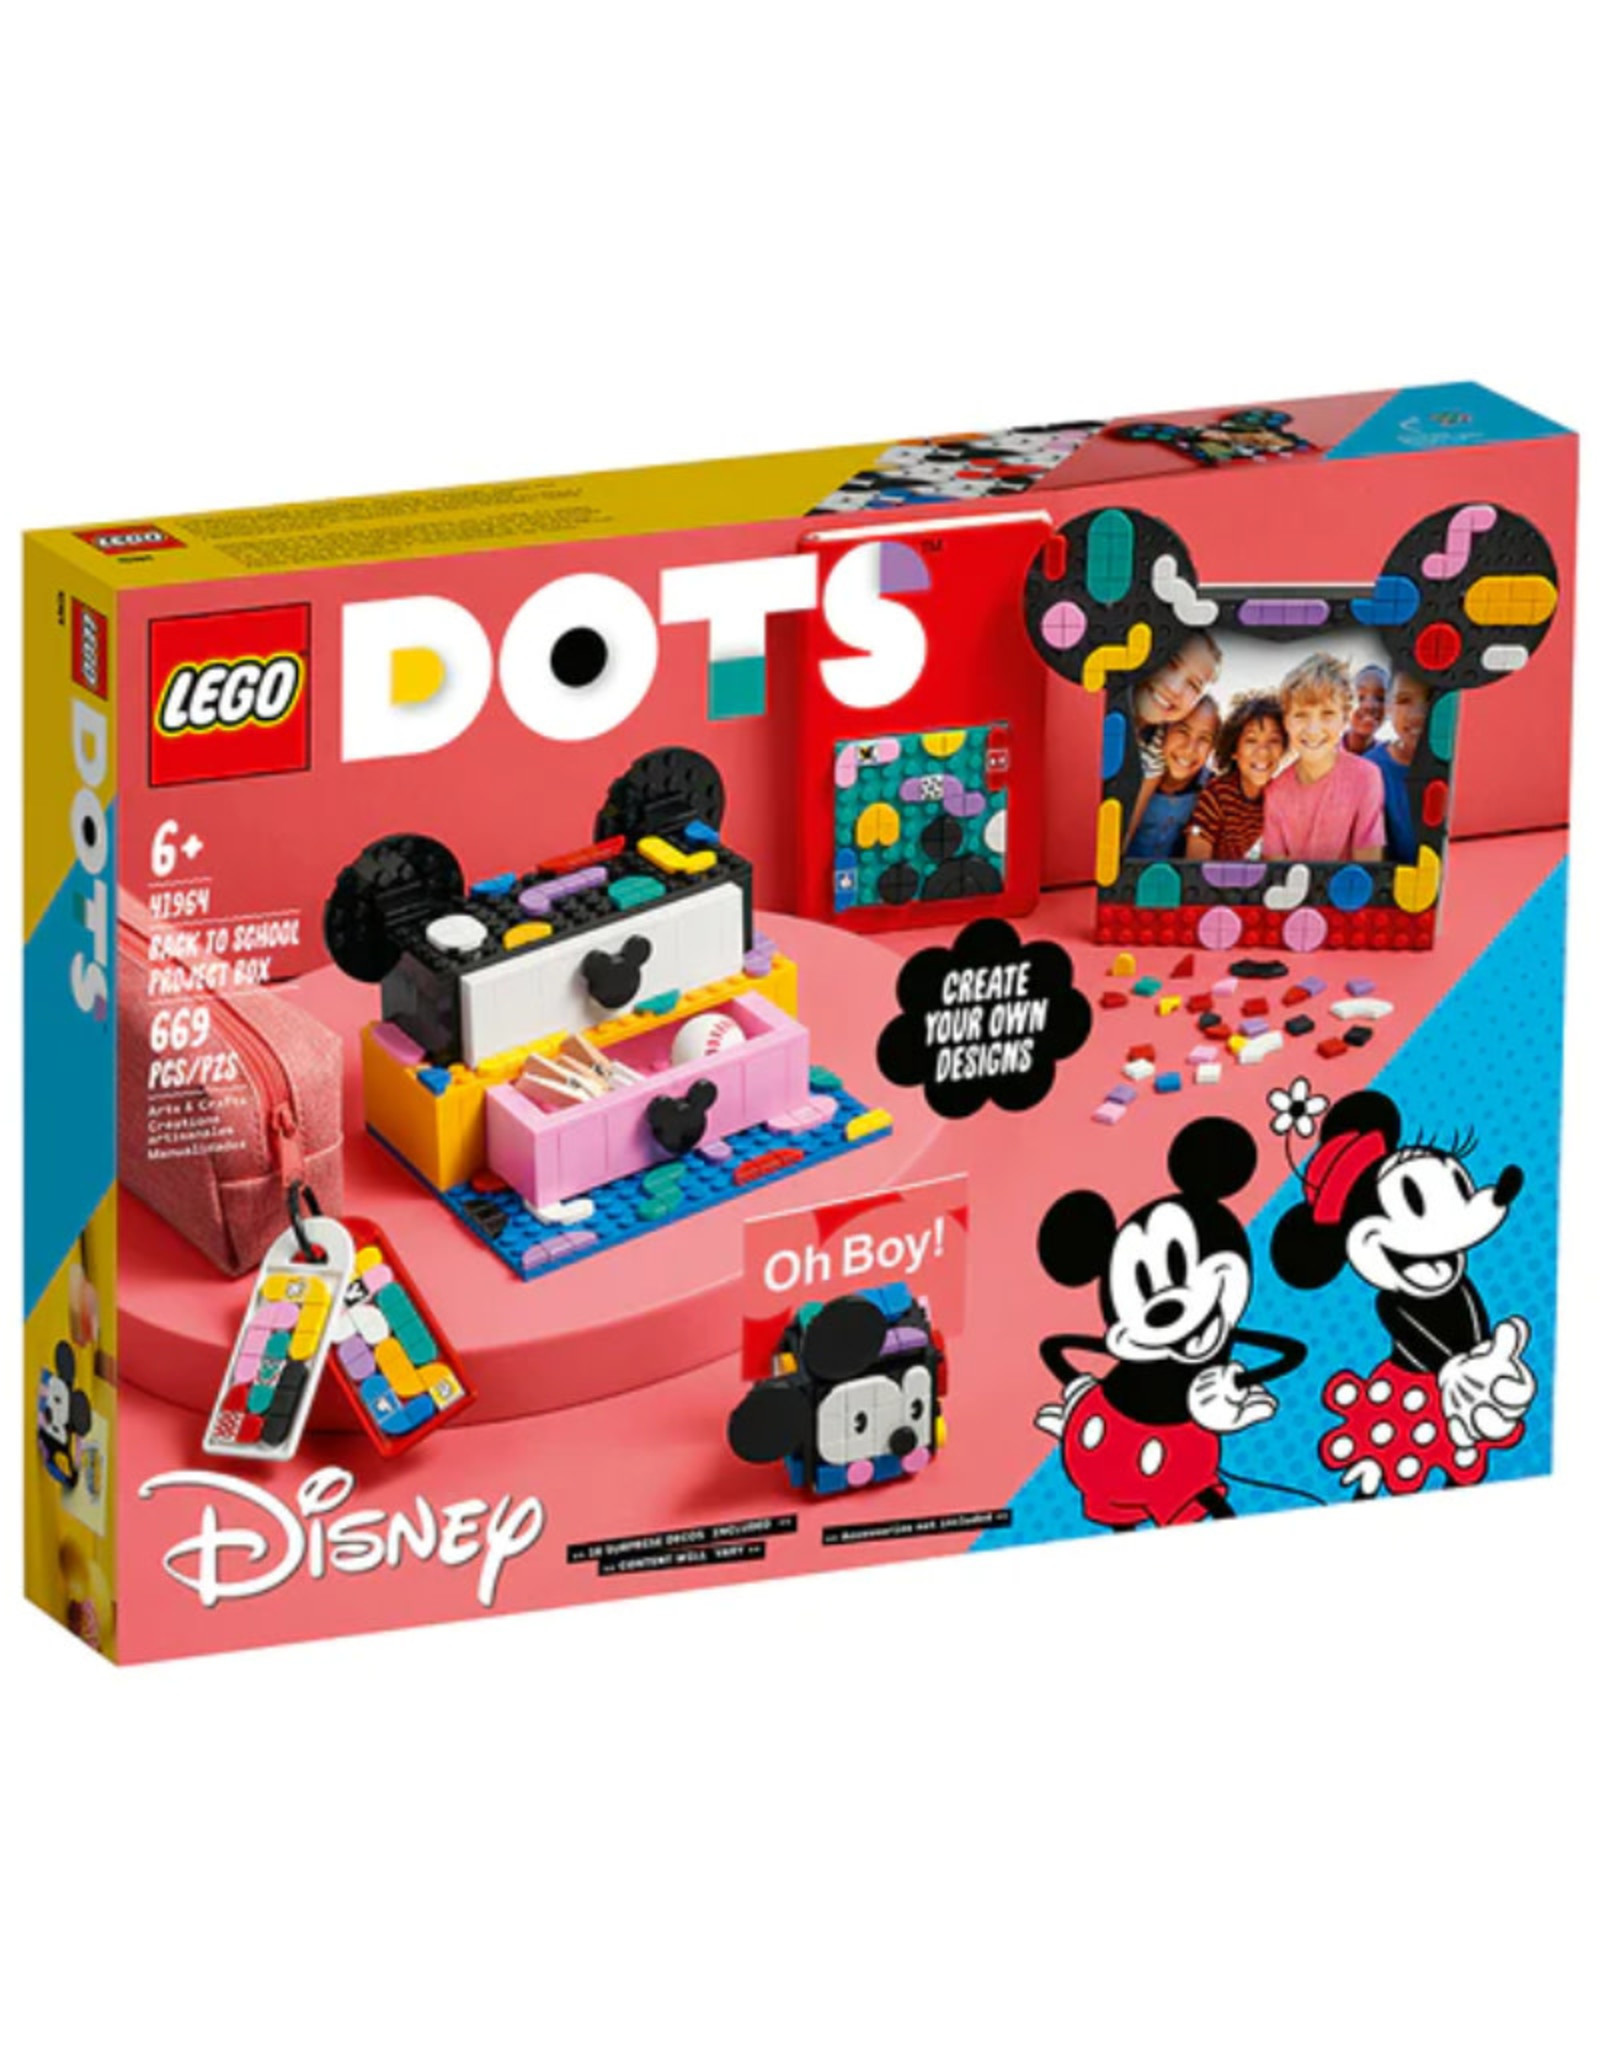 LEGO DOTS Mickey Mouse & Minnie Mouse Back To School Project Box 41964